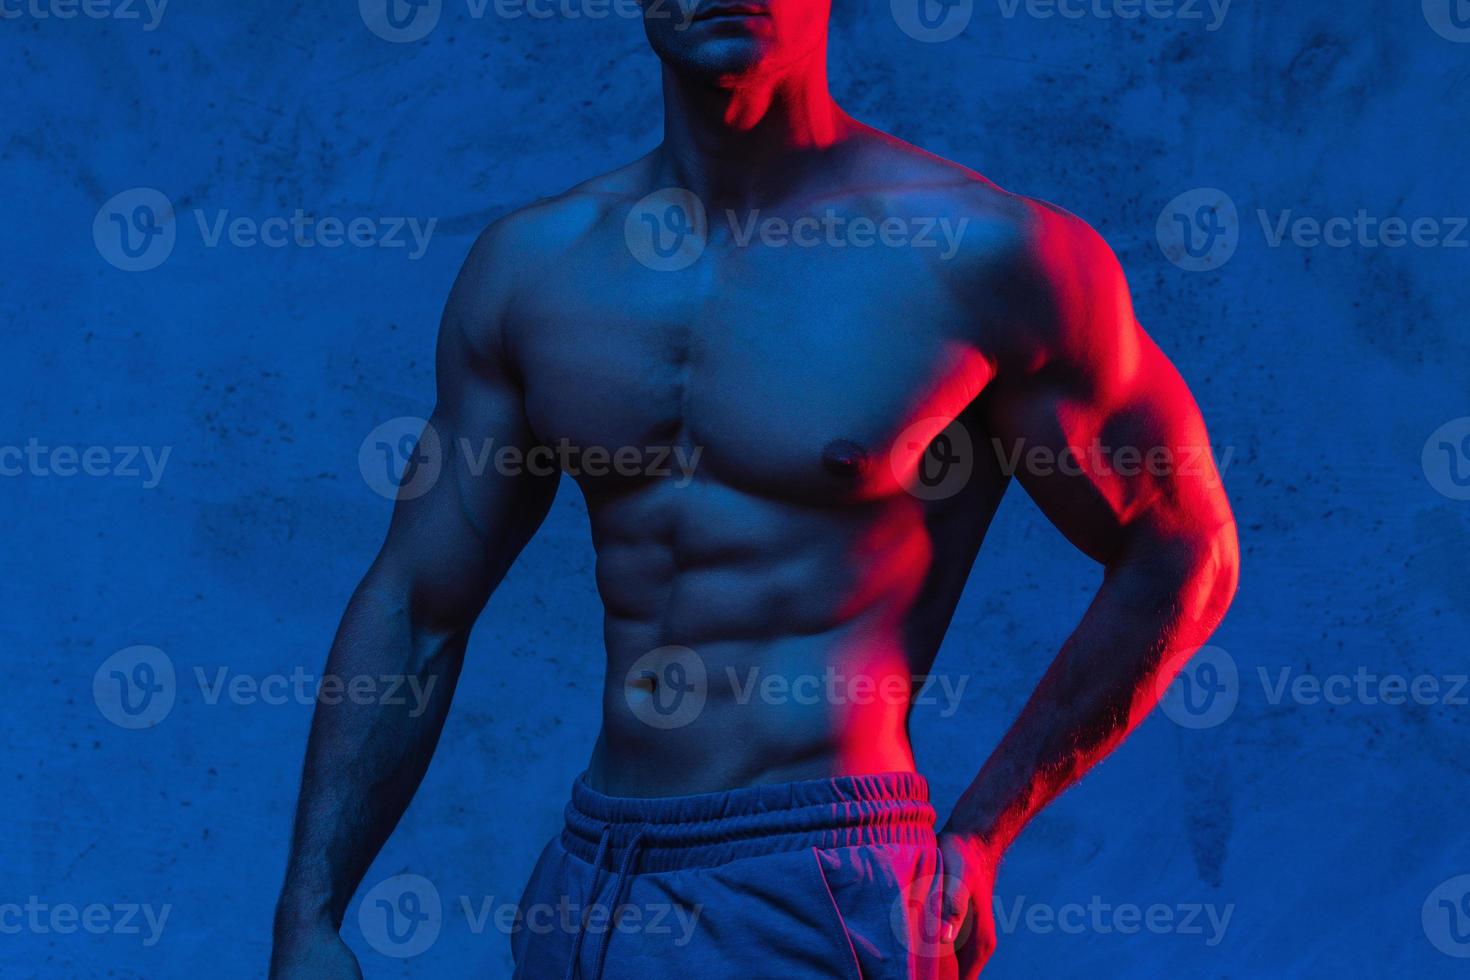 Bodybuilder is posing in the colorful neon light photo